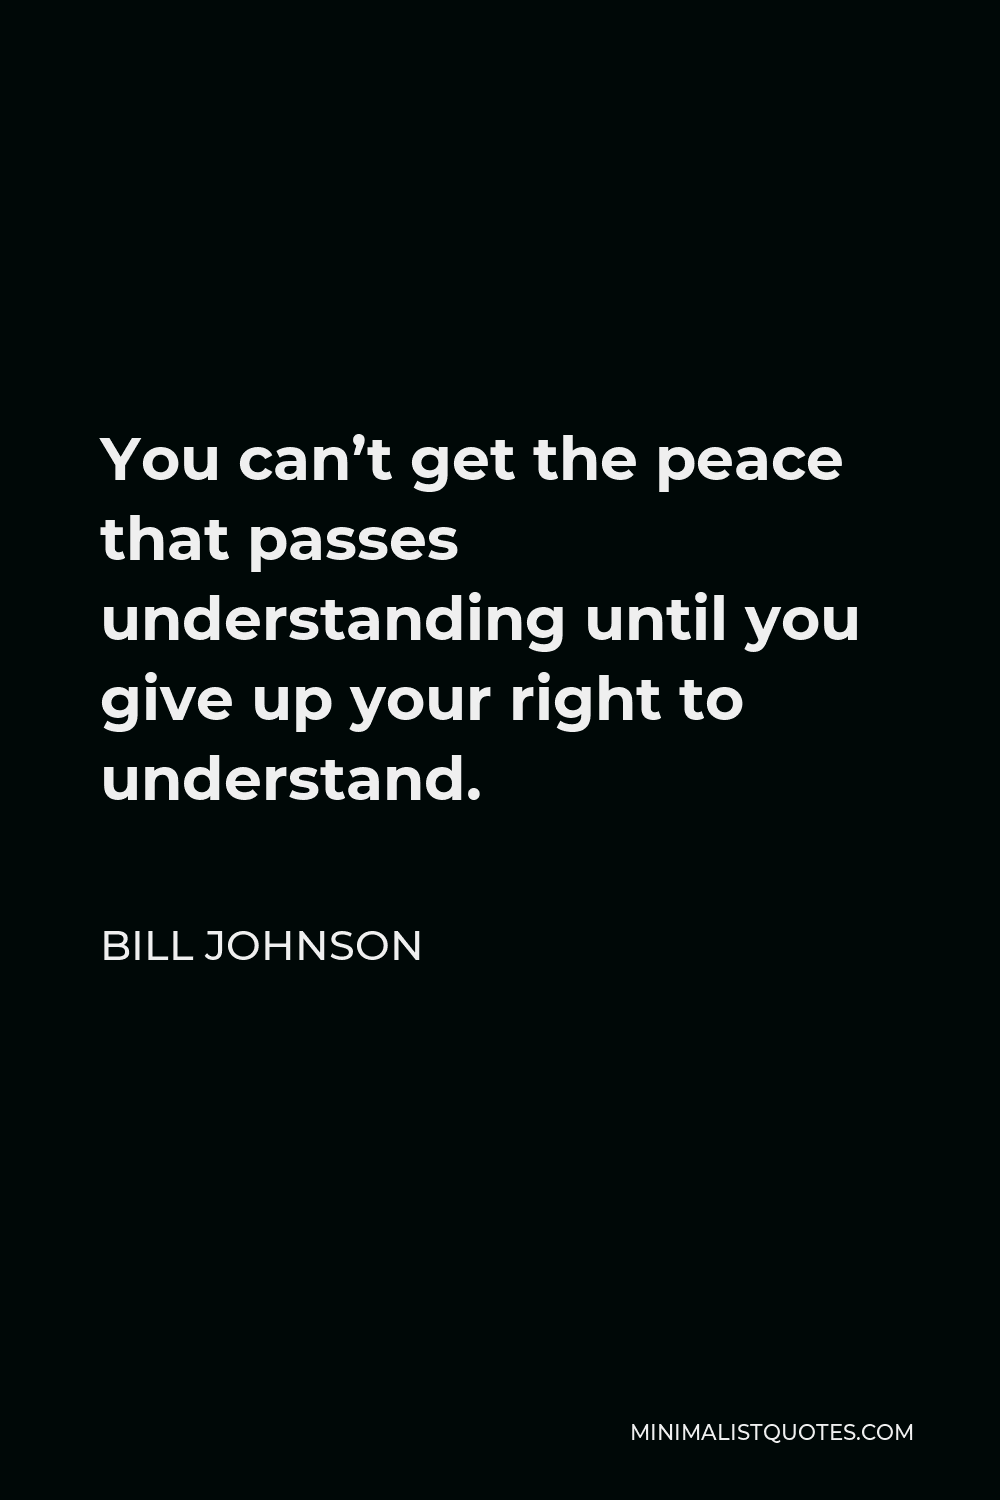 Bill Johnson Quote - You can’t get the peace that passes understanding until you give up your right to understand.